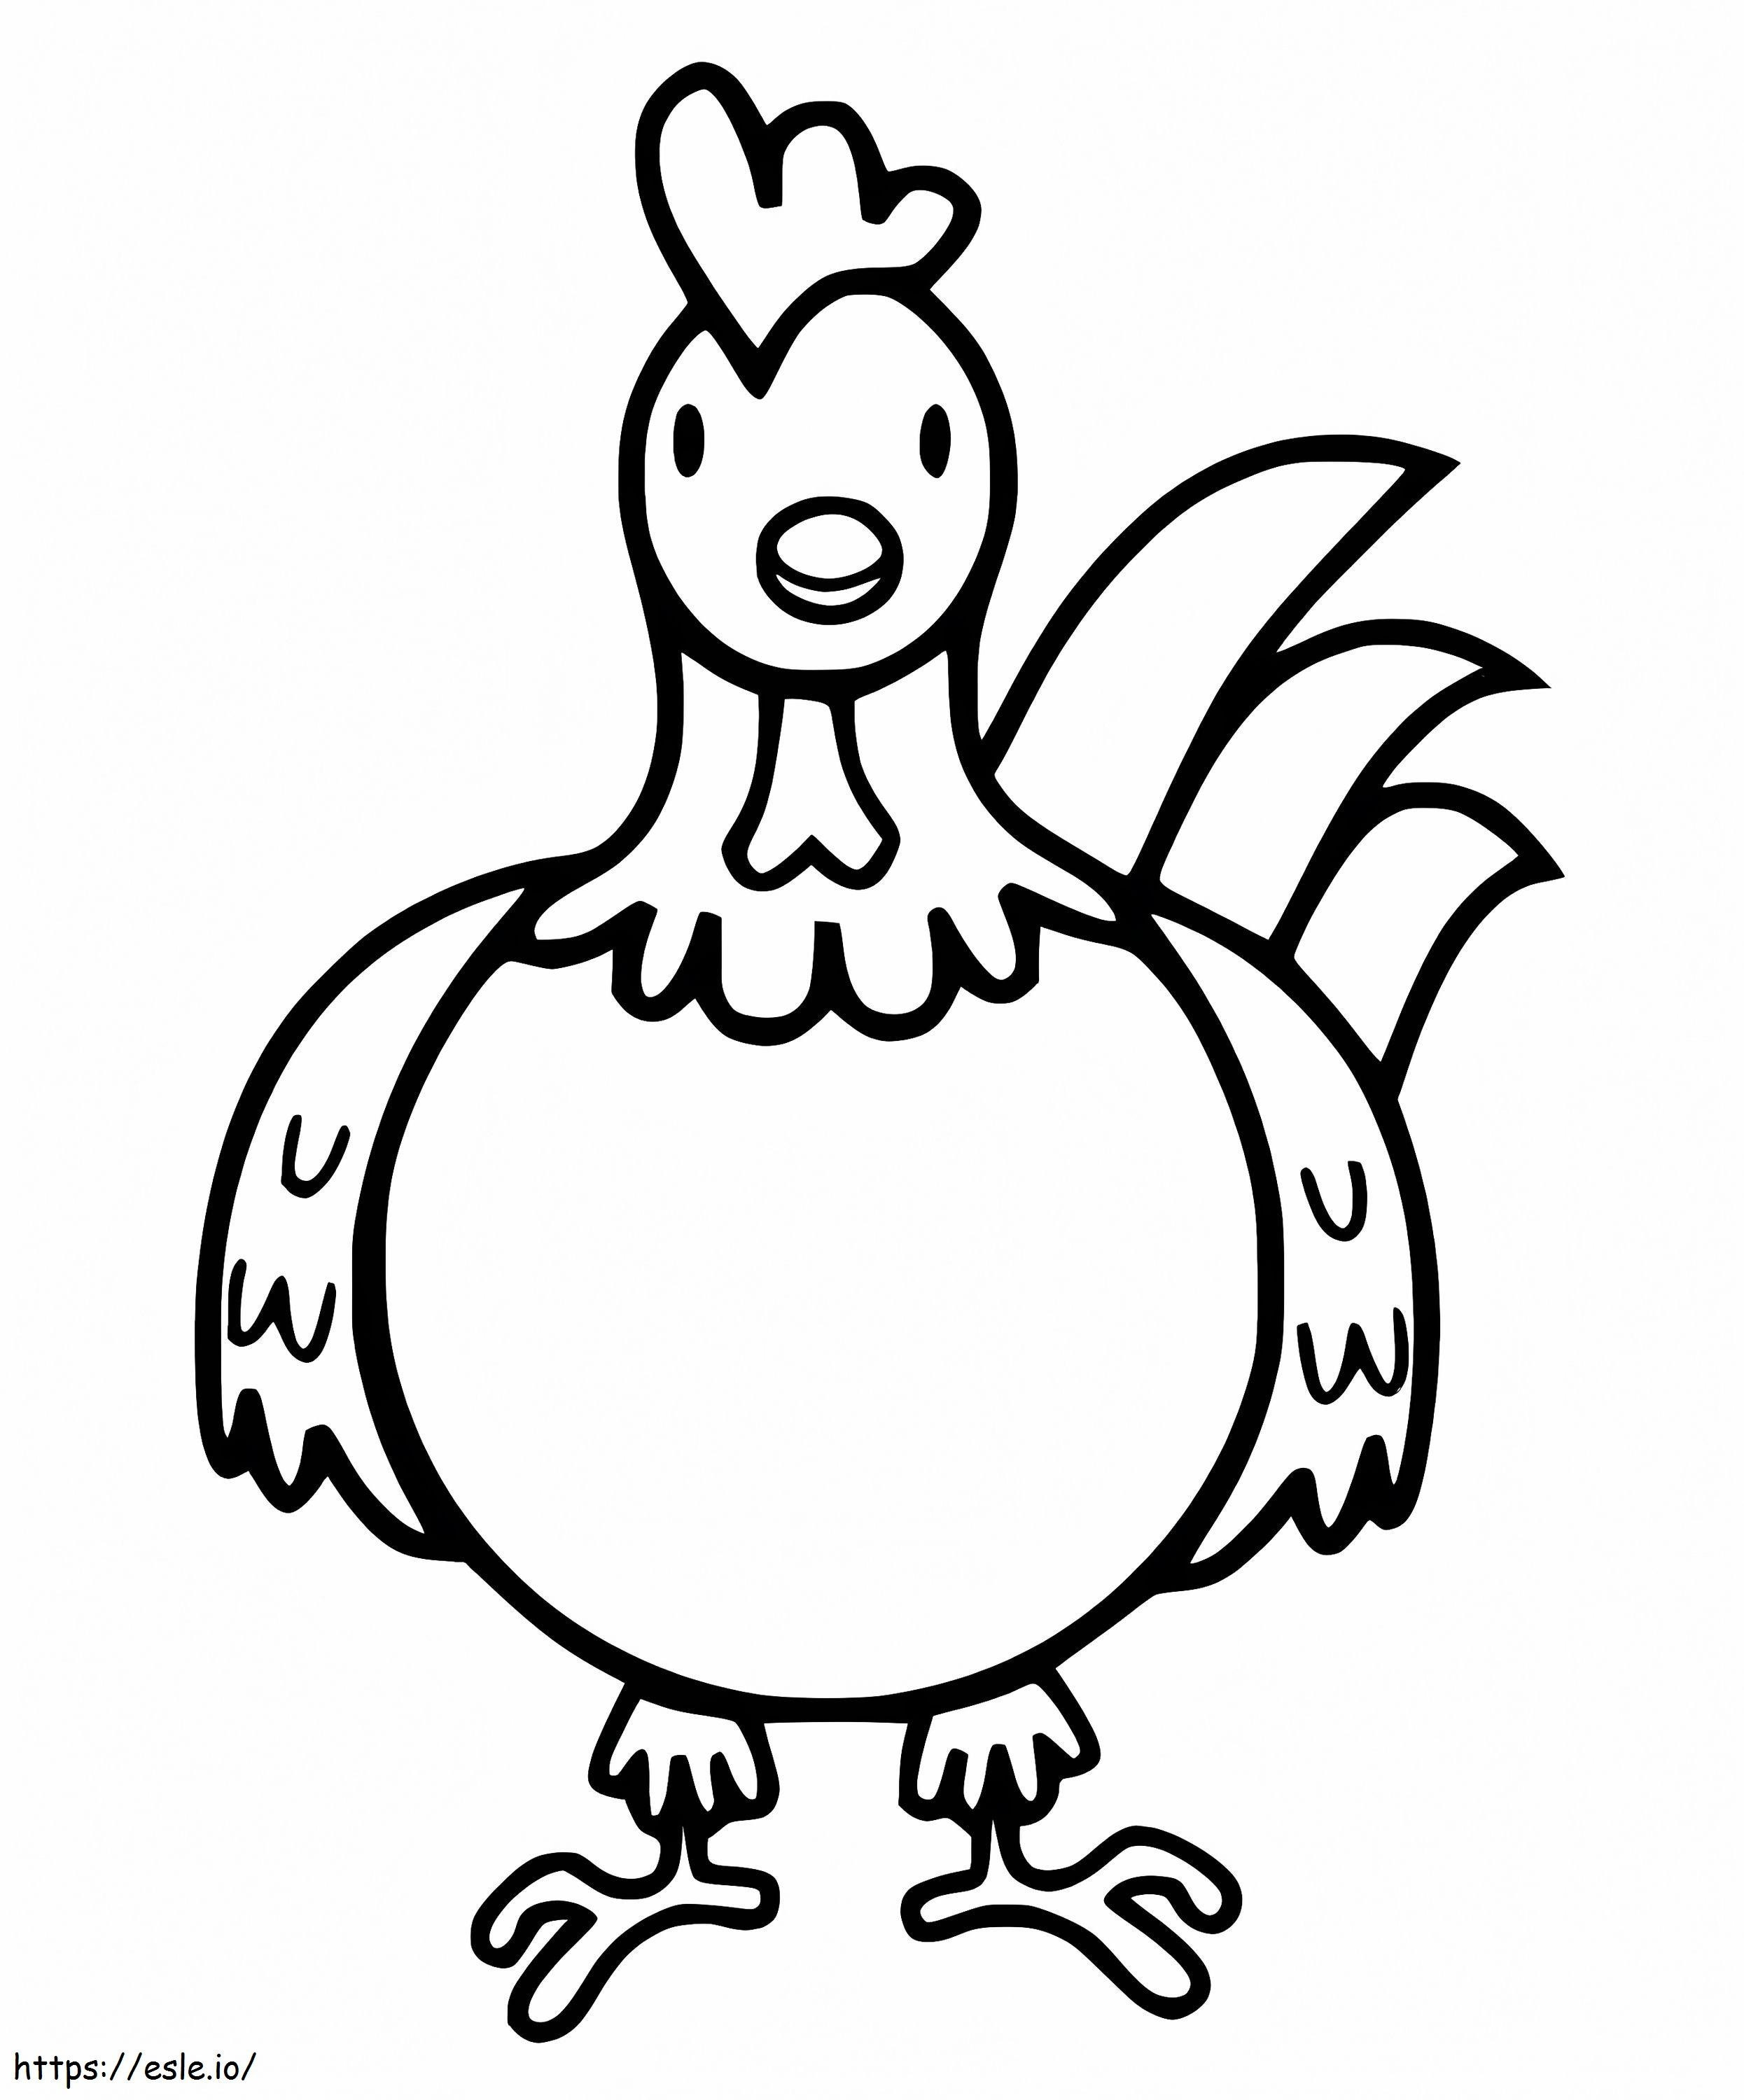 A Chicken coloring page